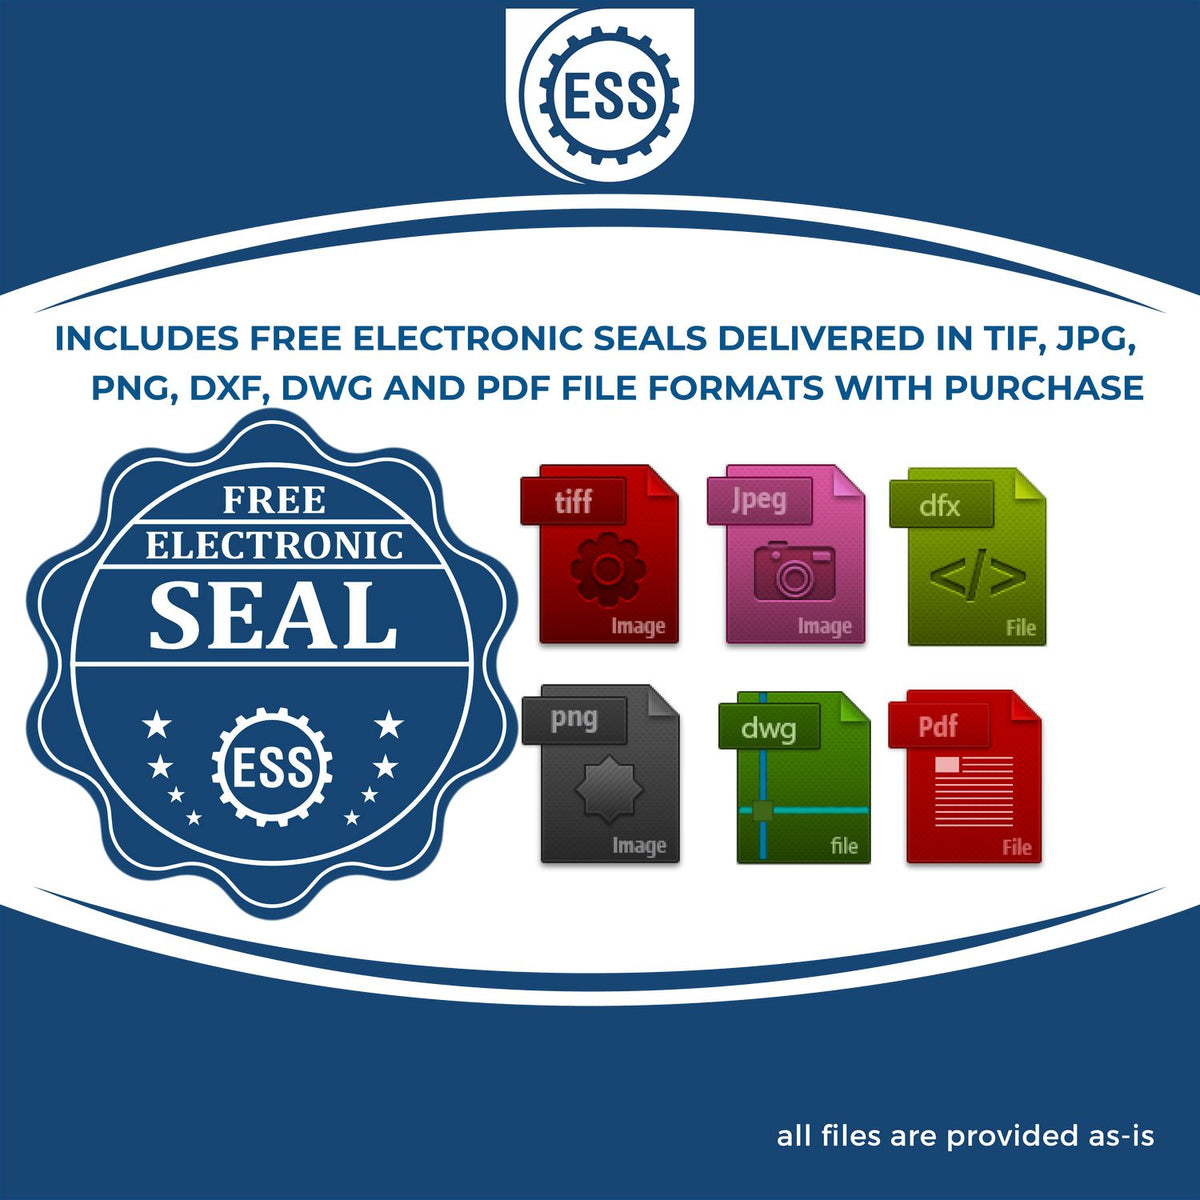 An infographic for the free electronic seal for the Heavy Duty Cast Iron New Hampshire Geologist Seal Embosser illustrating the different file type icons such as DXF, DWG, TIF, JPG and PNG.